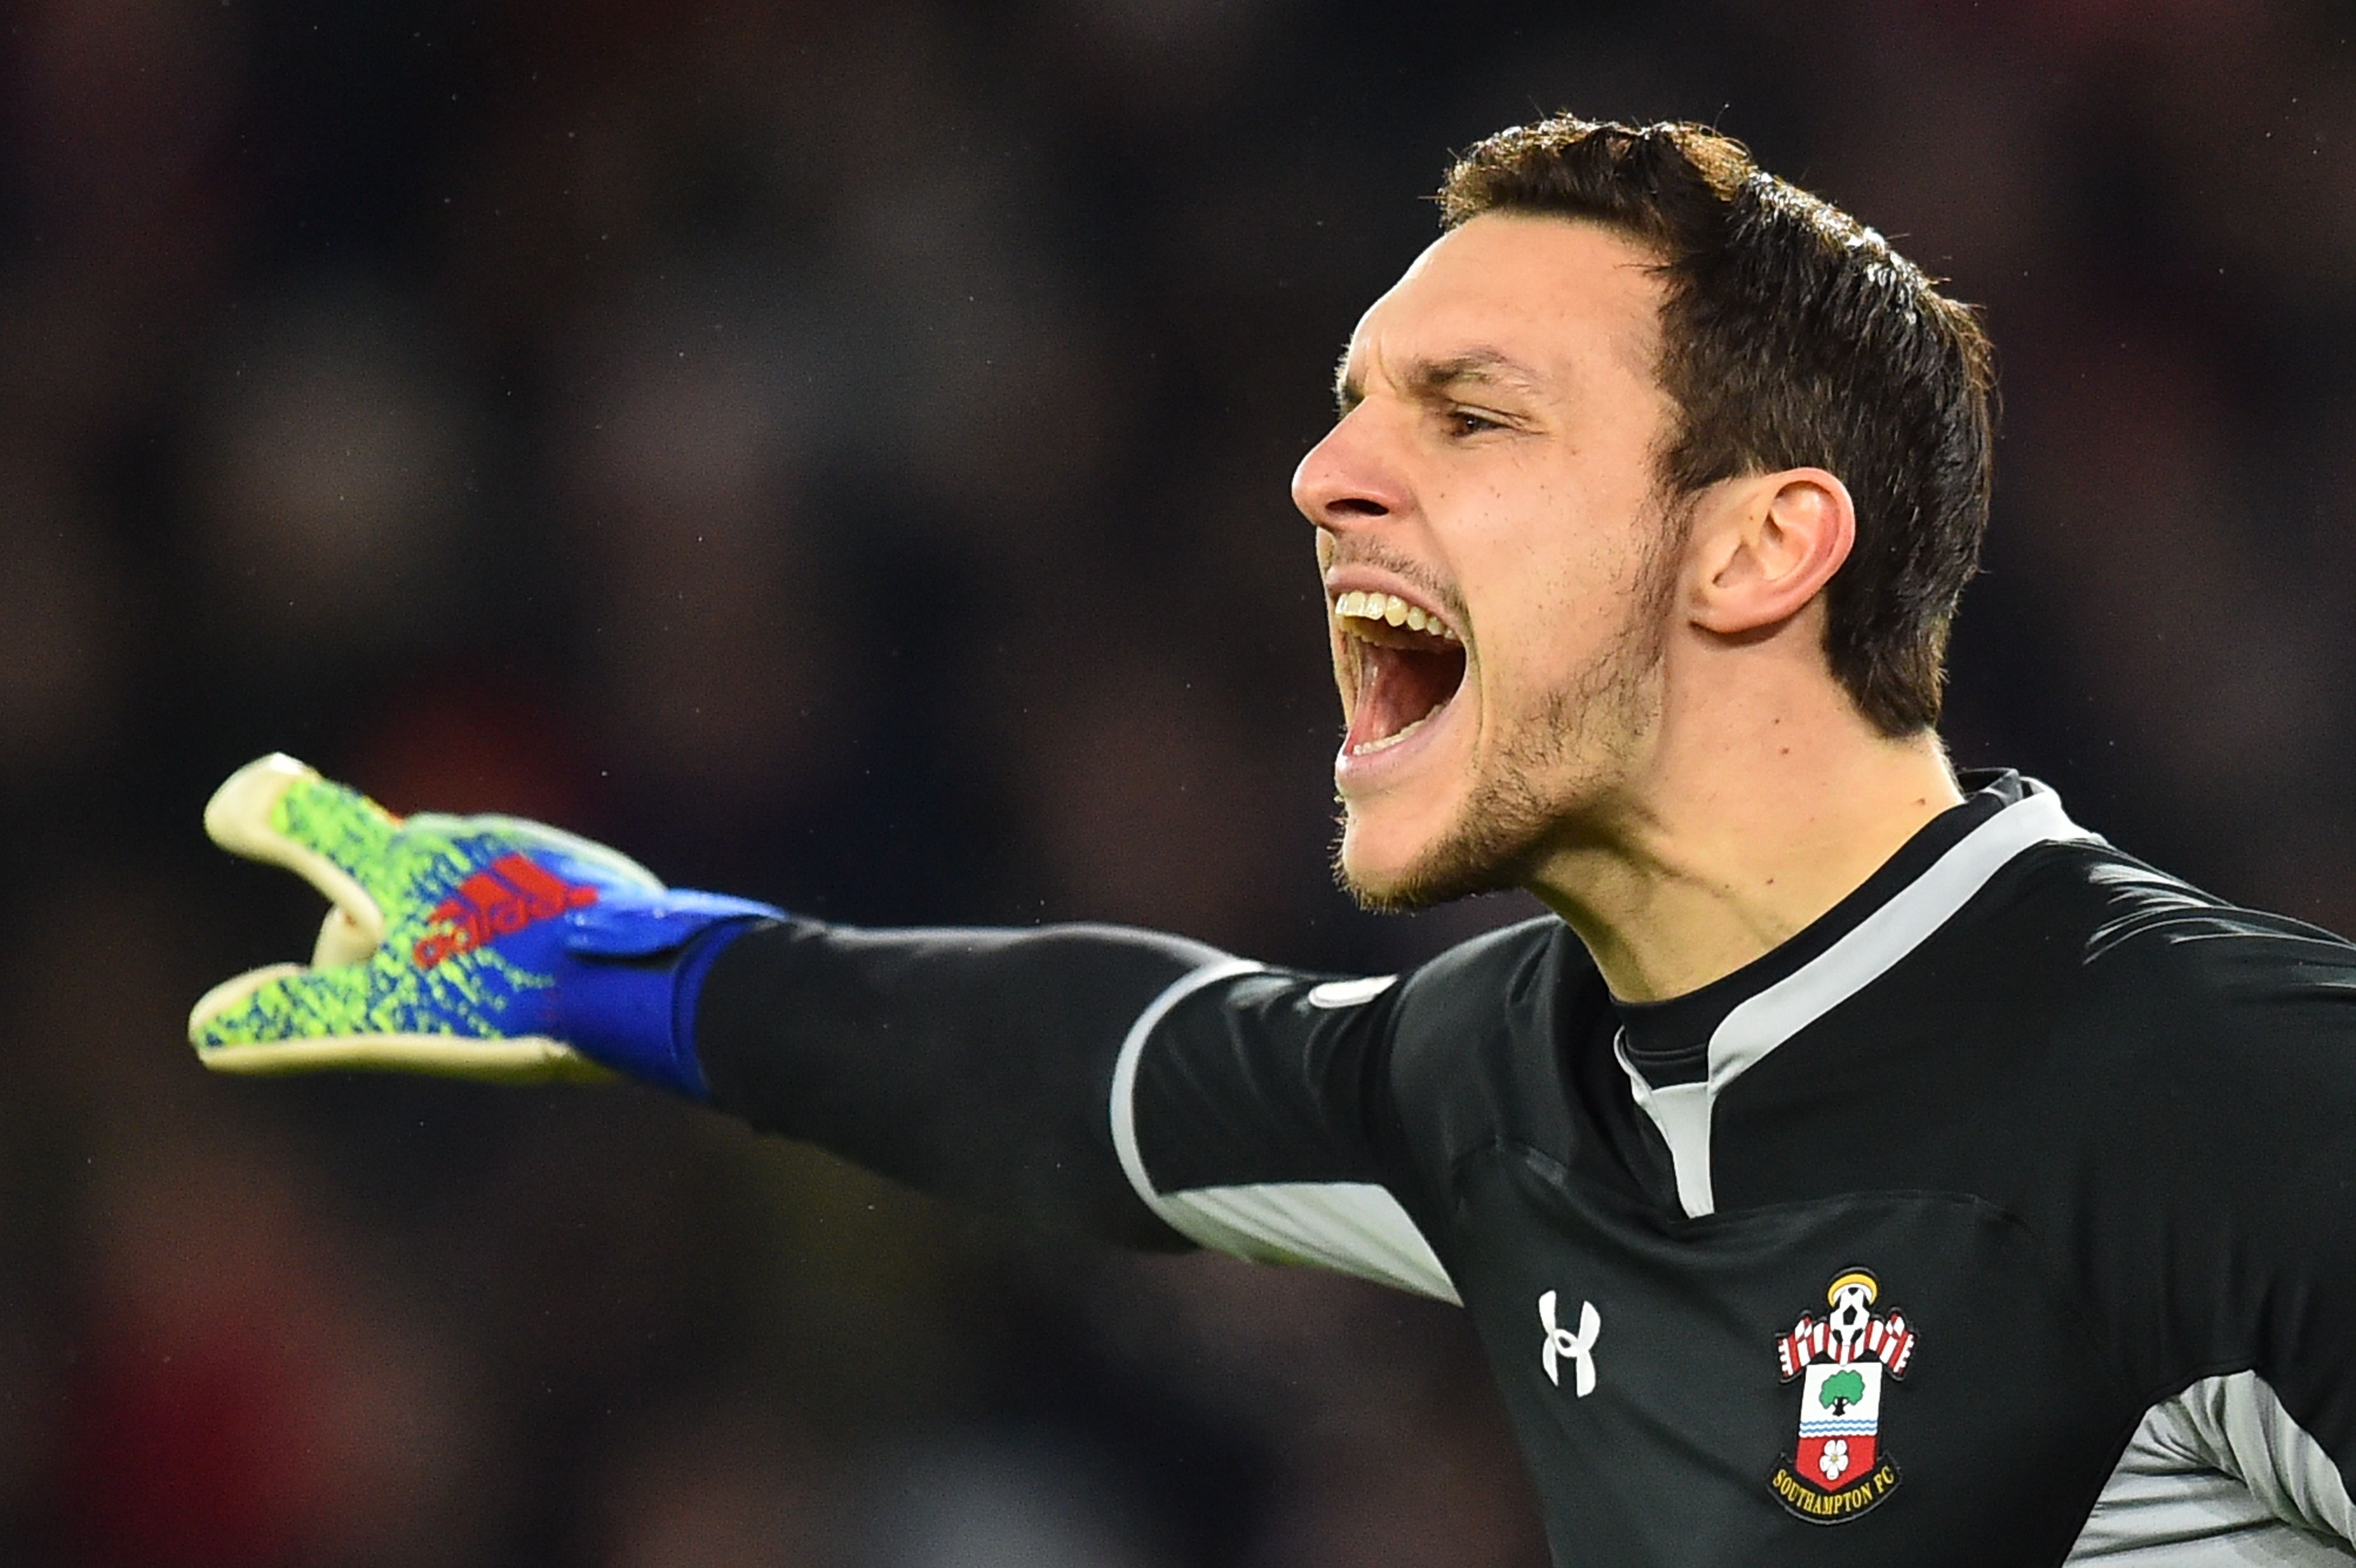 Southampton's English goalkeeper Alex McCarthy gestures during the English Premier League football match between Southampton and Everton at St Mary's Stadium in Southampton, southern England on January 19, 2019. (Photo by Glyn KIRK / AFP) / RESTRICTED TO EDITORIAL USE. No use with unauthorized audio, video, data, fixture lists, club/league logos or 'live' services. Online in-match use limited to 120 images. An additional 40 images may be used in extra time. No video emulation. Social media in-match use limited to 120 images. An additional 40 images may be used in extra time. No use in betting publications, games or single club/league/player publications. /         (Photo credit should read GLYN KIRK/AFP/Getty Images)